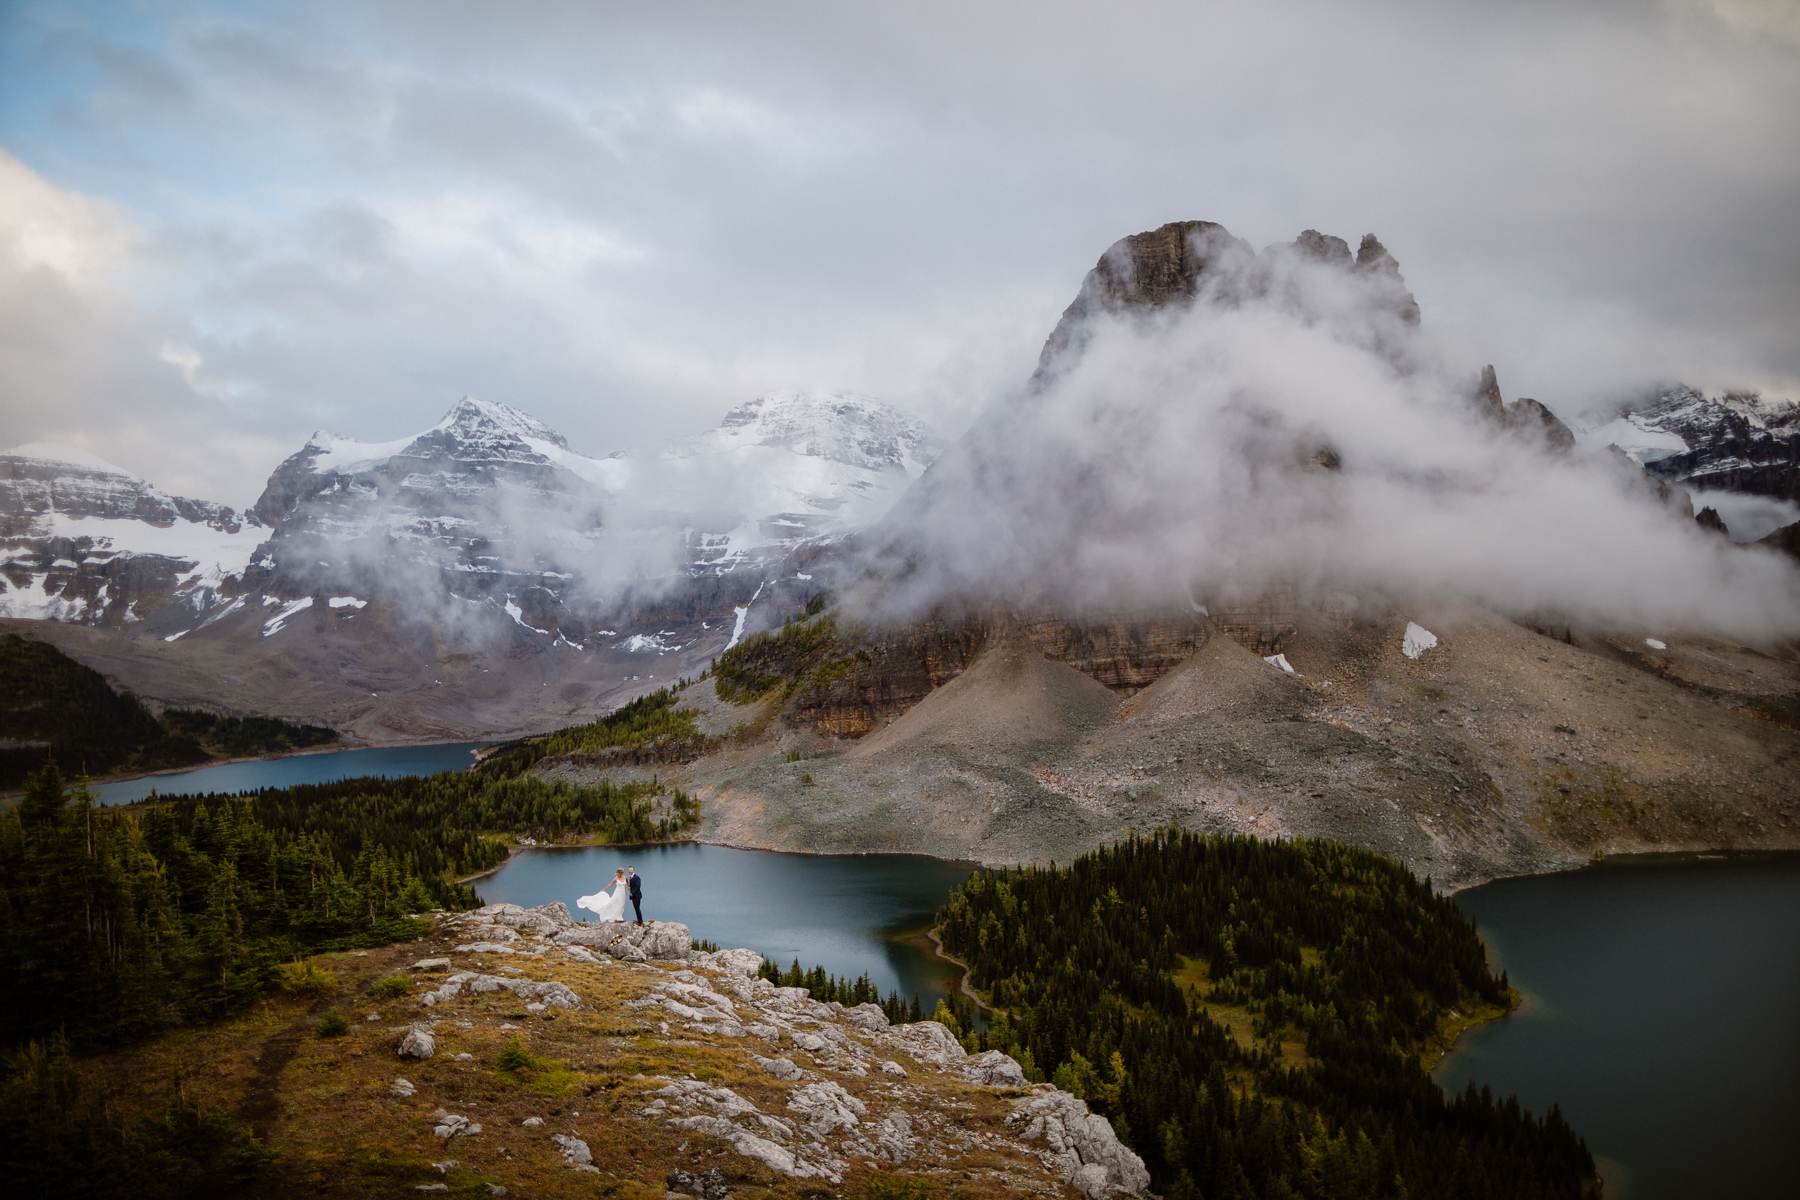 Mount Assiniboine Elopement Photographers at a Backcountry Lodge - Photo 27